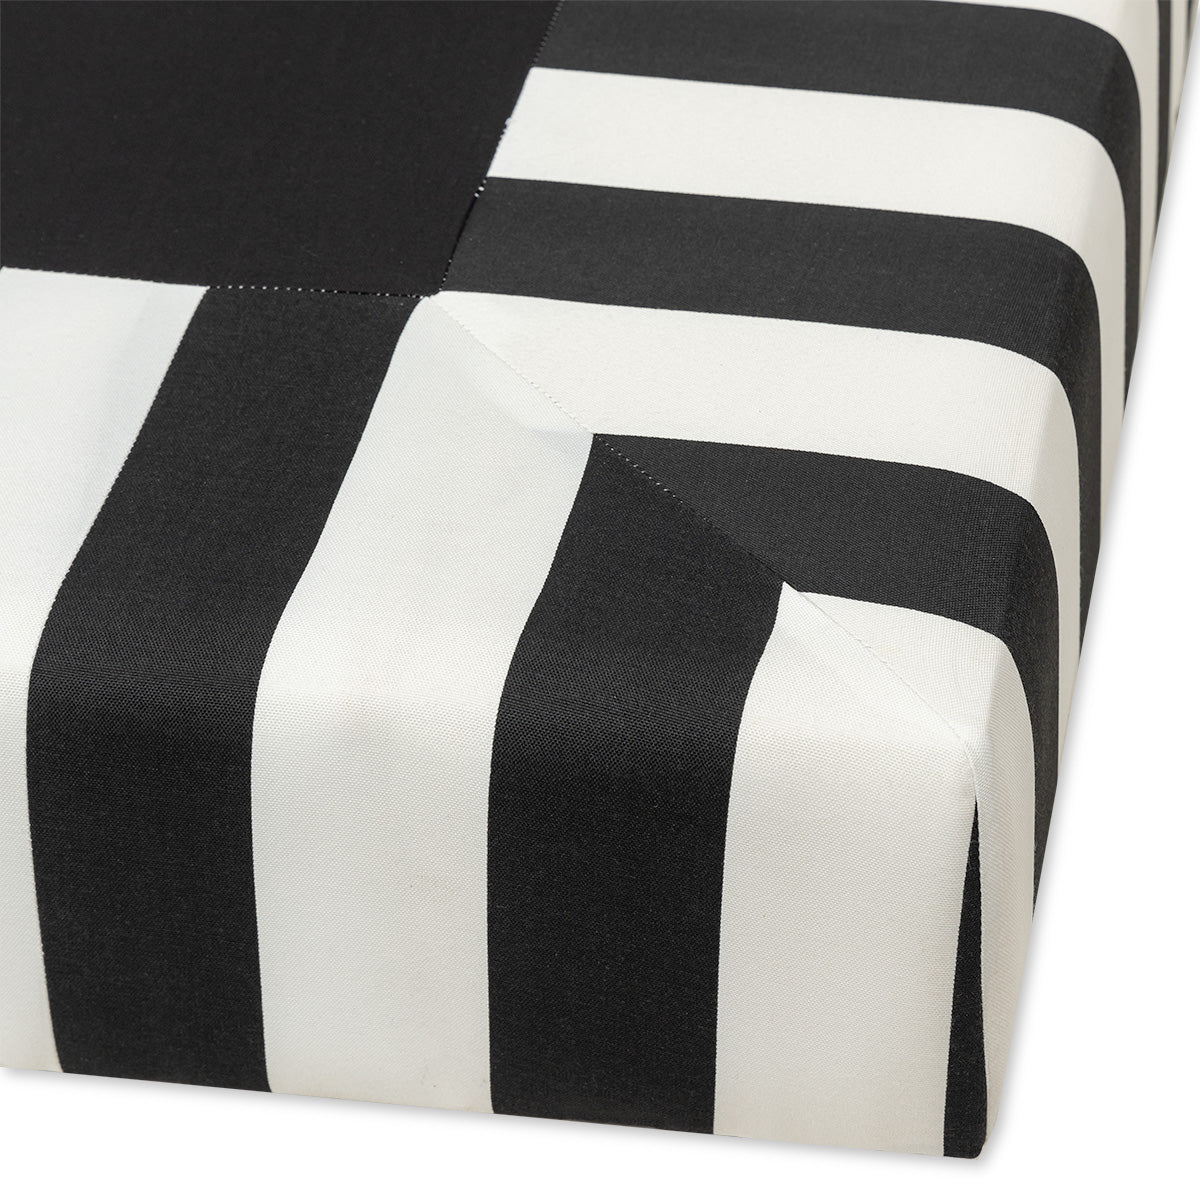 Tiffany Bed in Black and White Stripe Linen